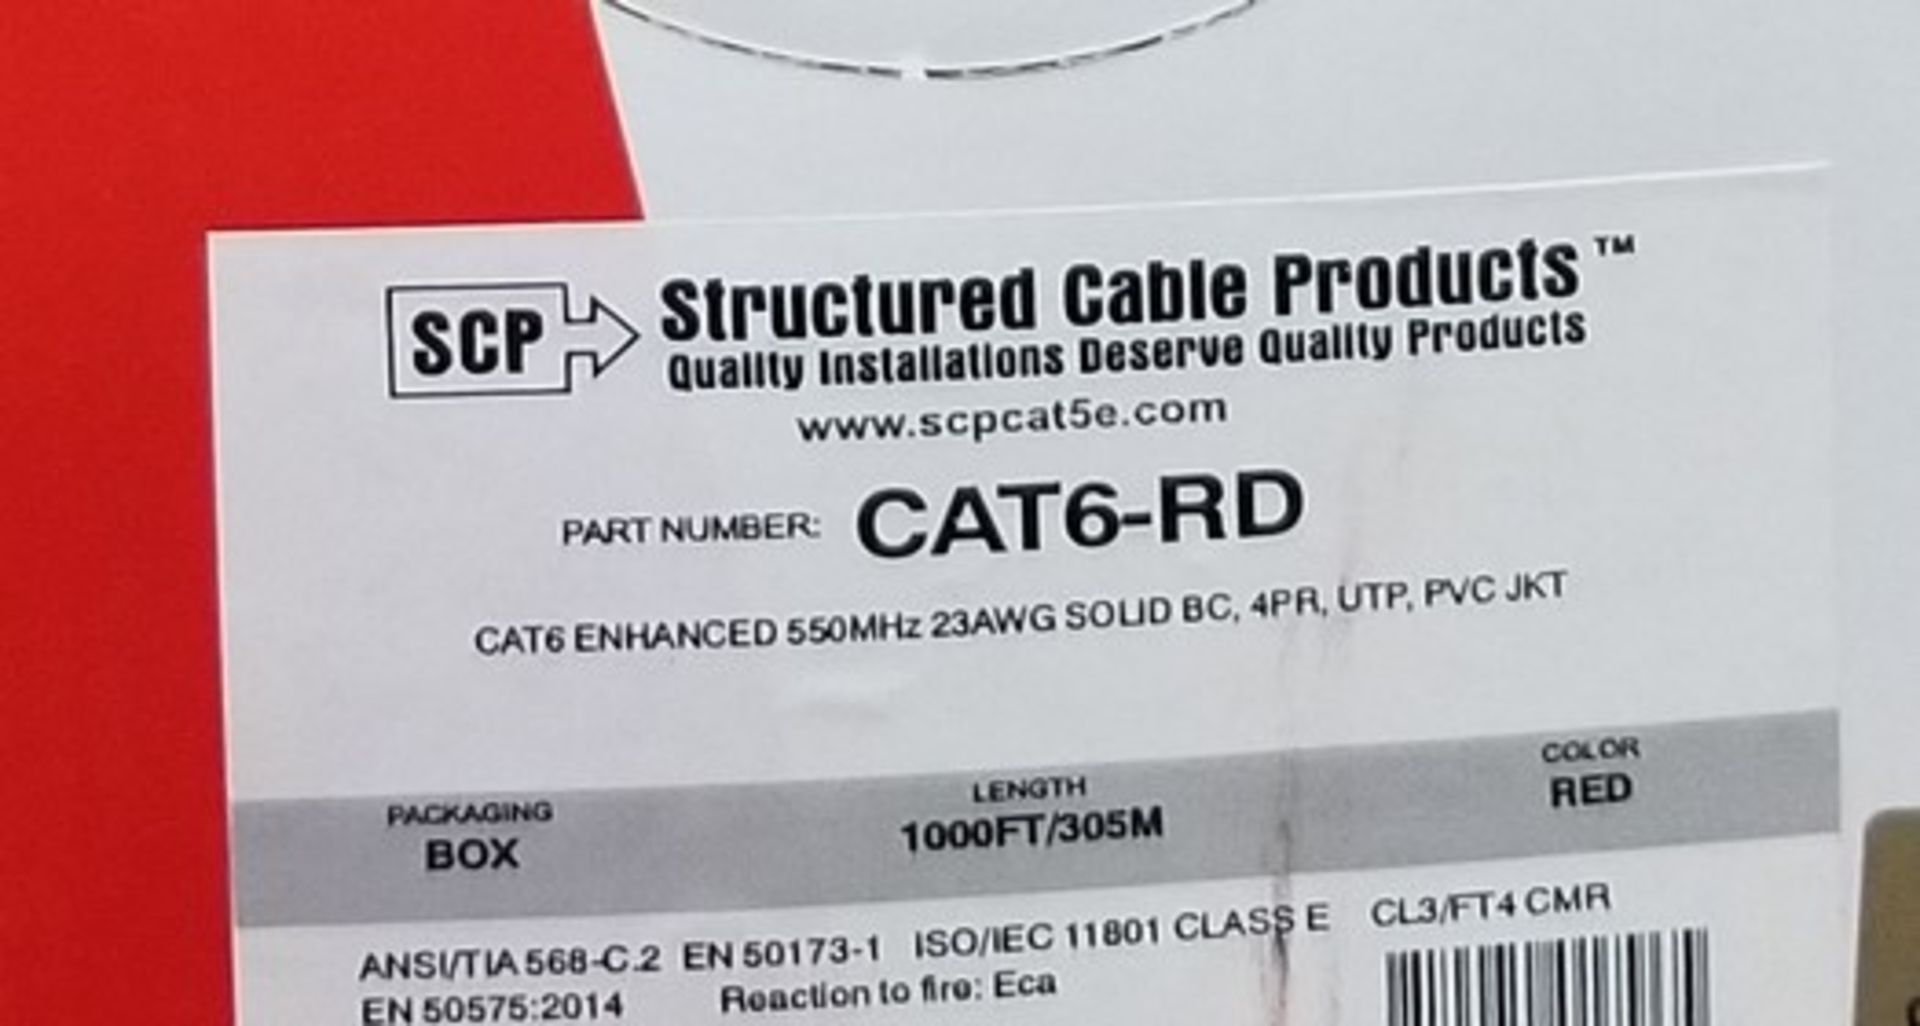 SCP, CAT6-RD NETWORKING LAN - 1000FT - Image 2 of 2